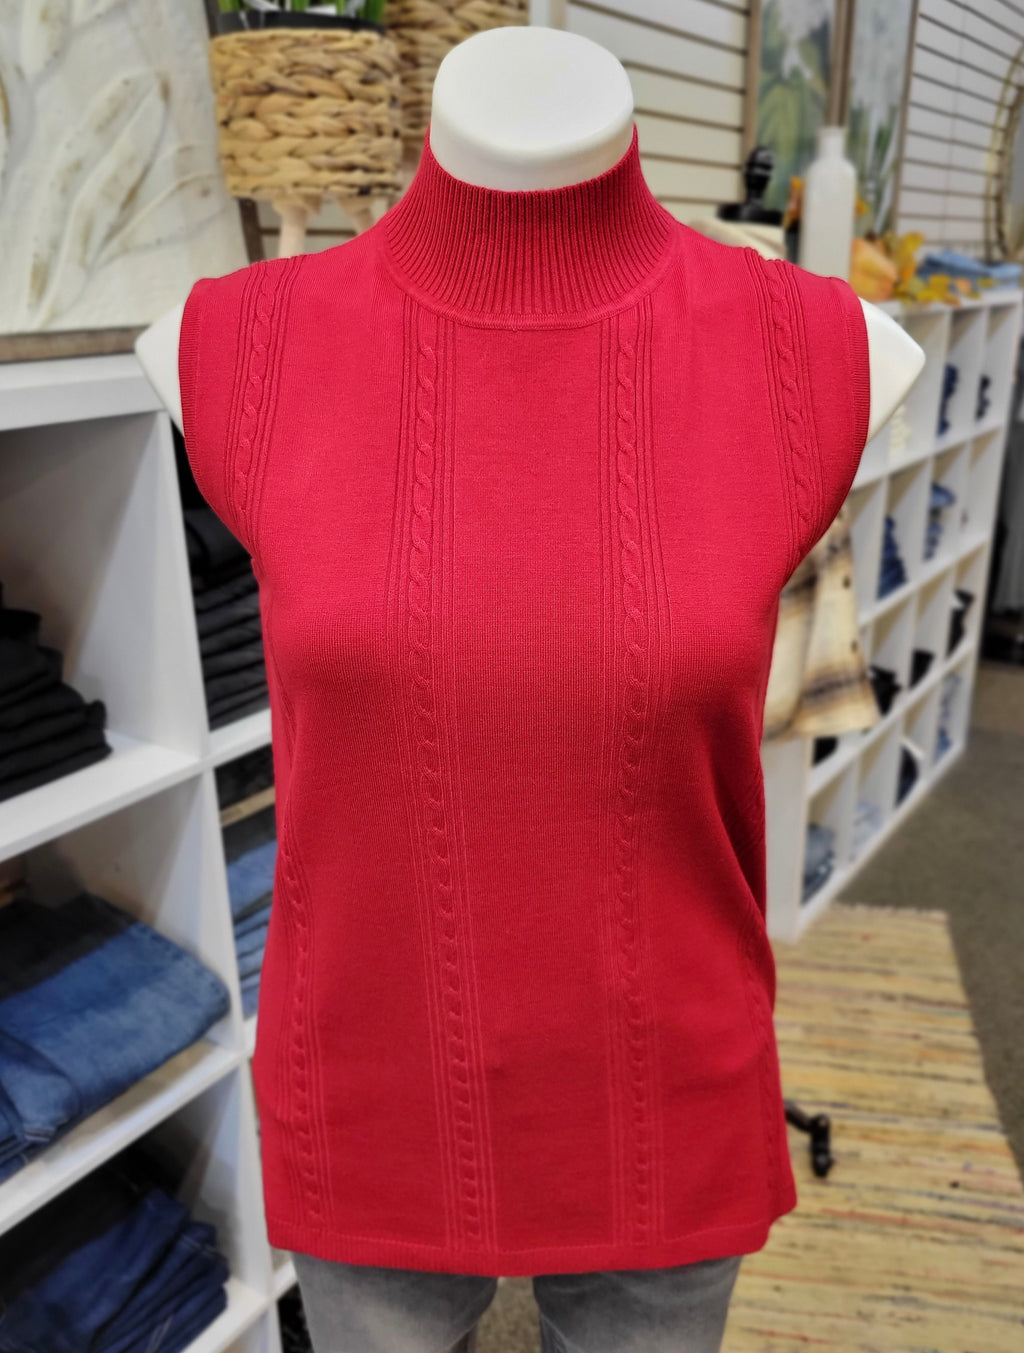 Sleeveless Mock Sweater - Red by Variations